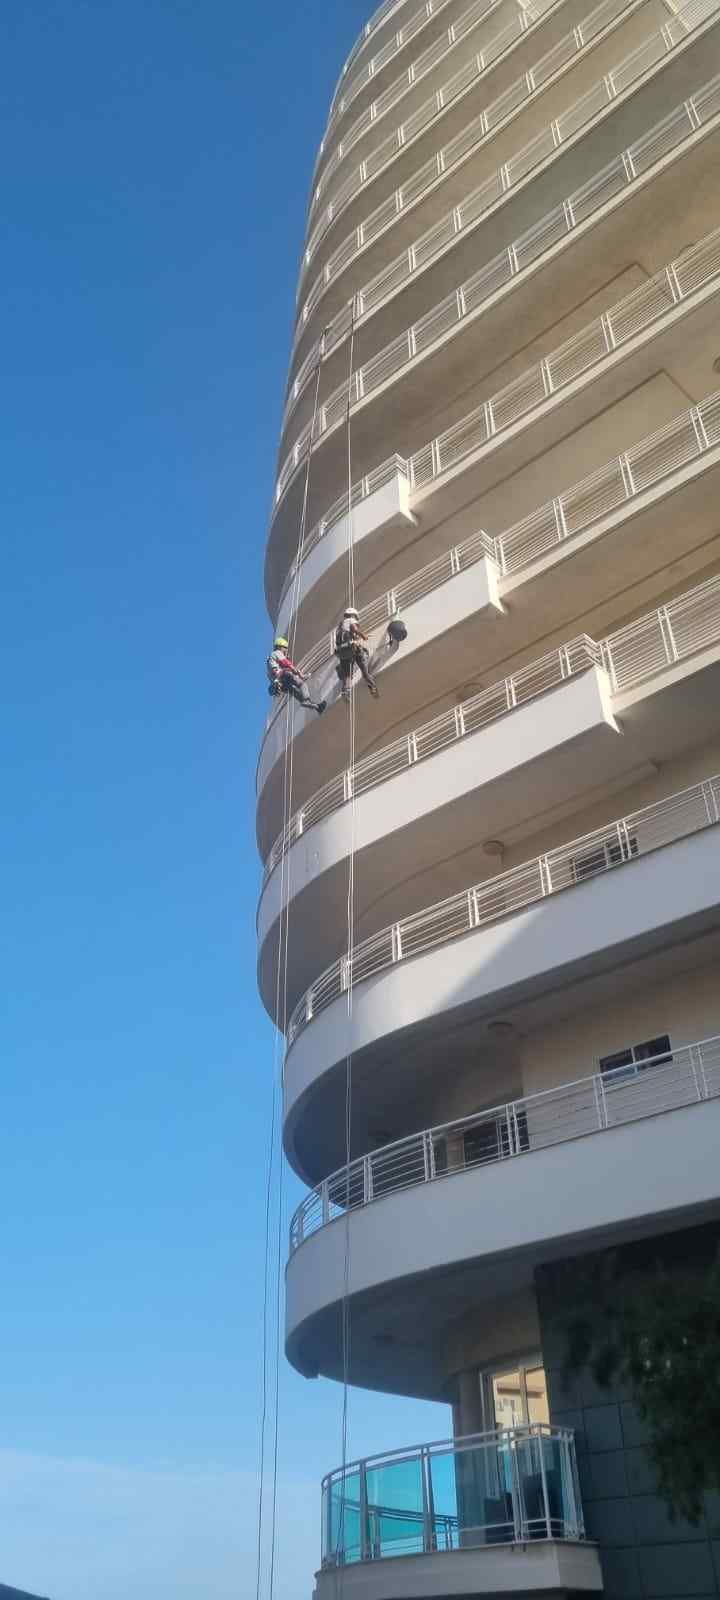 Spic & Span Window Cleaning & Rope Access Services - Handyman Services